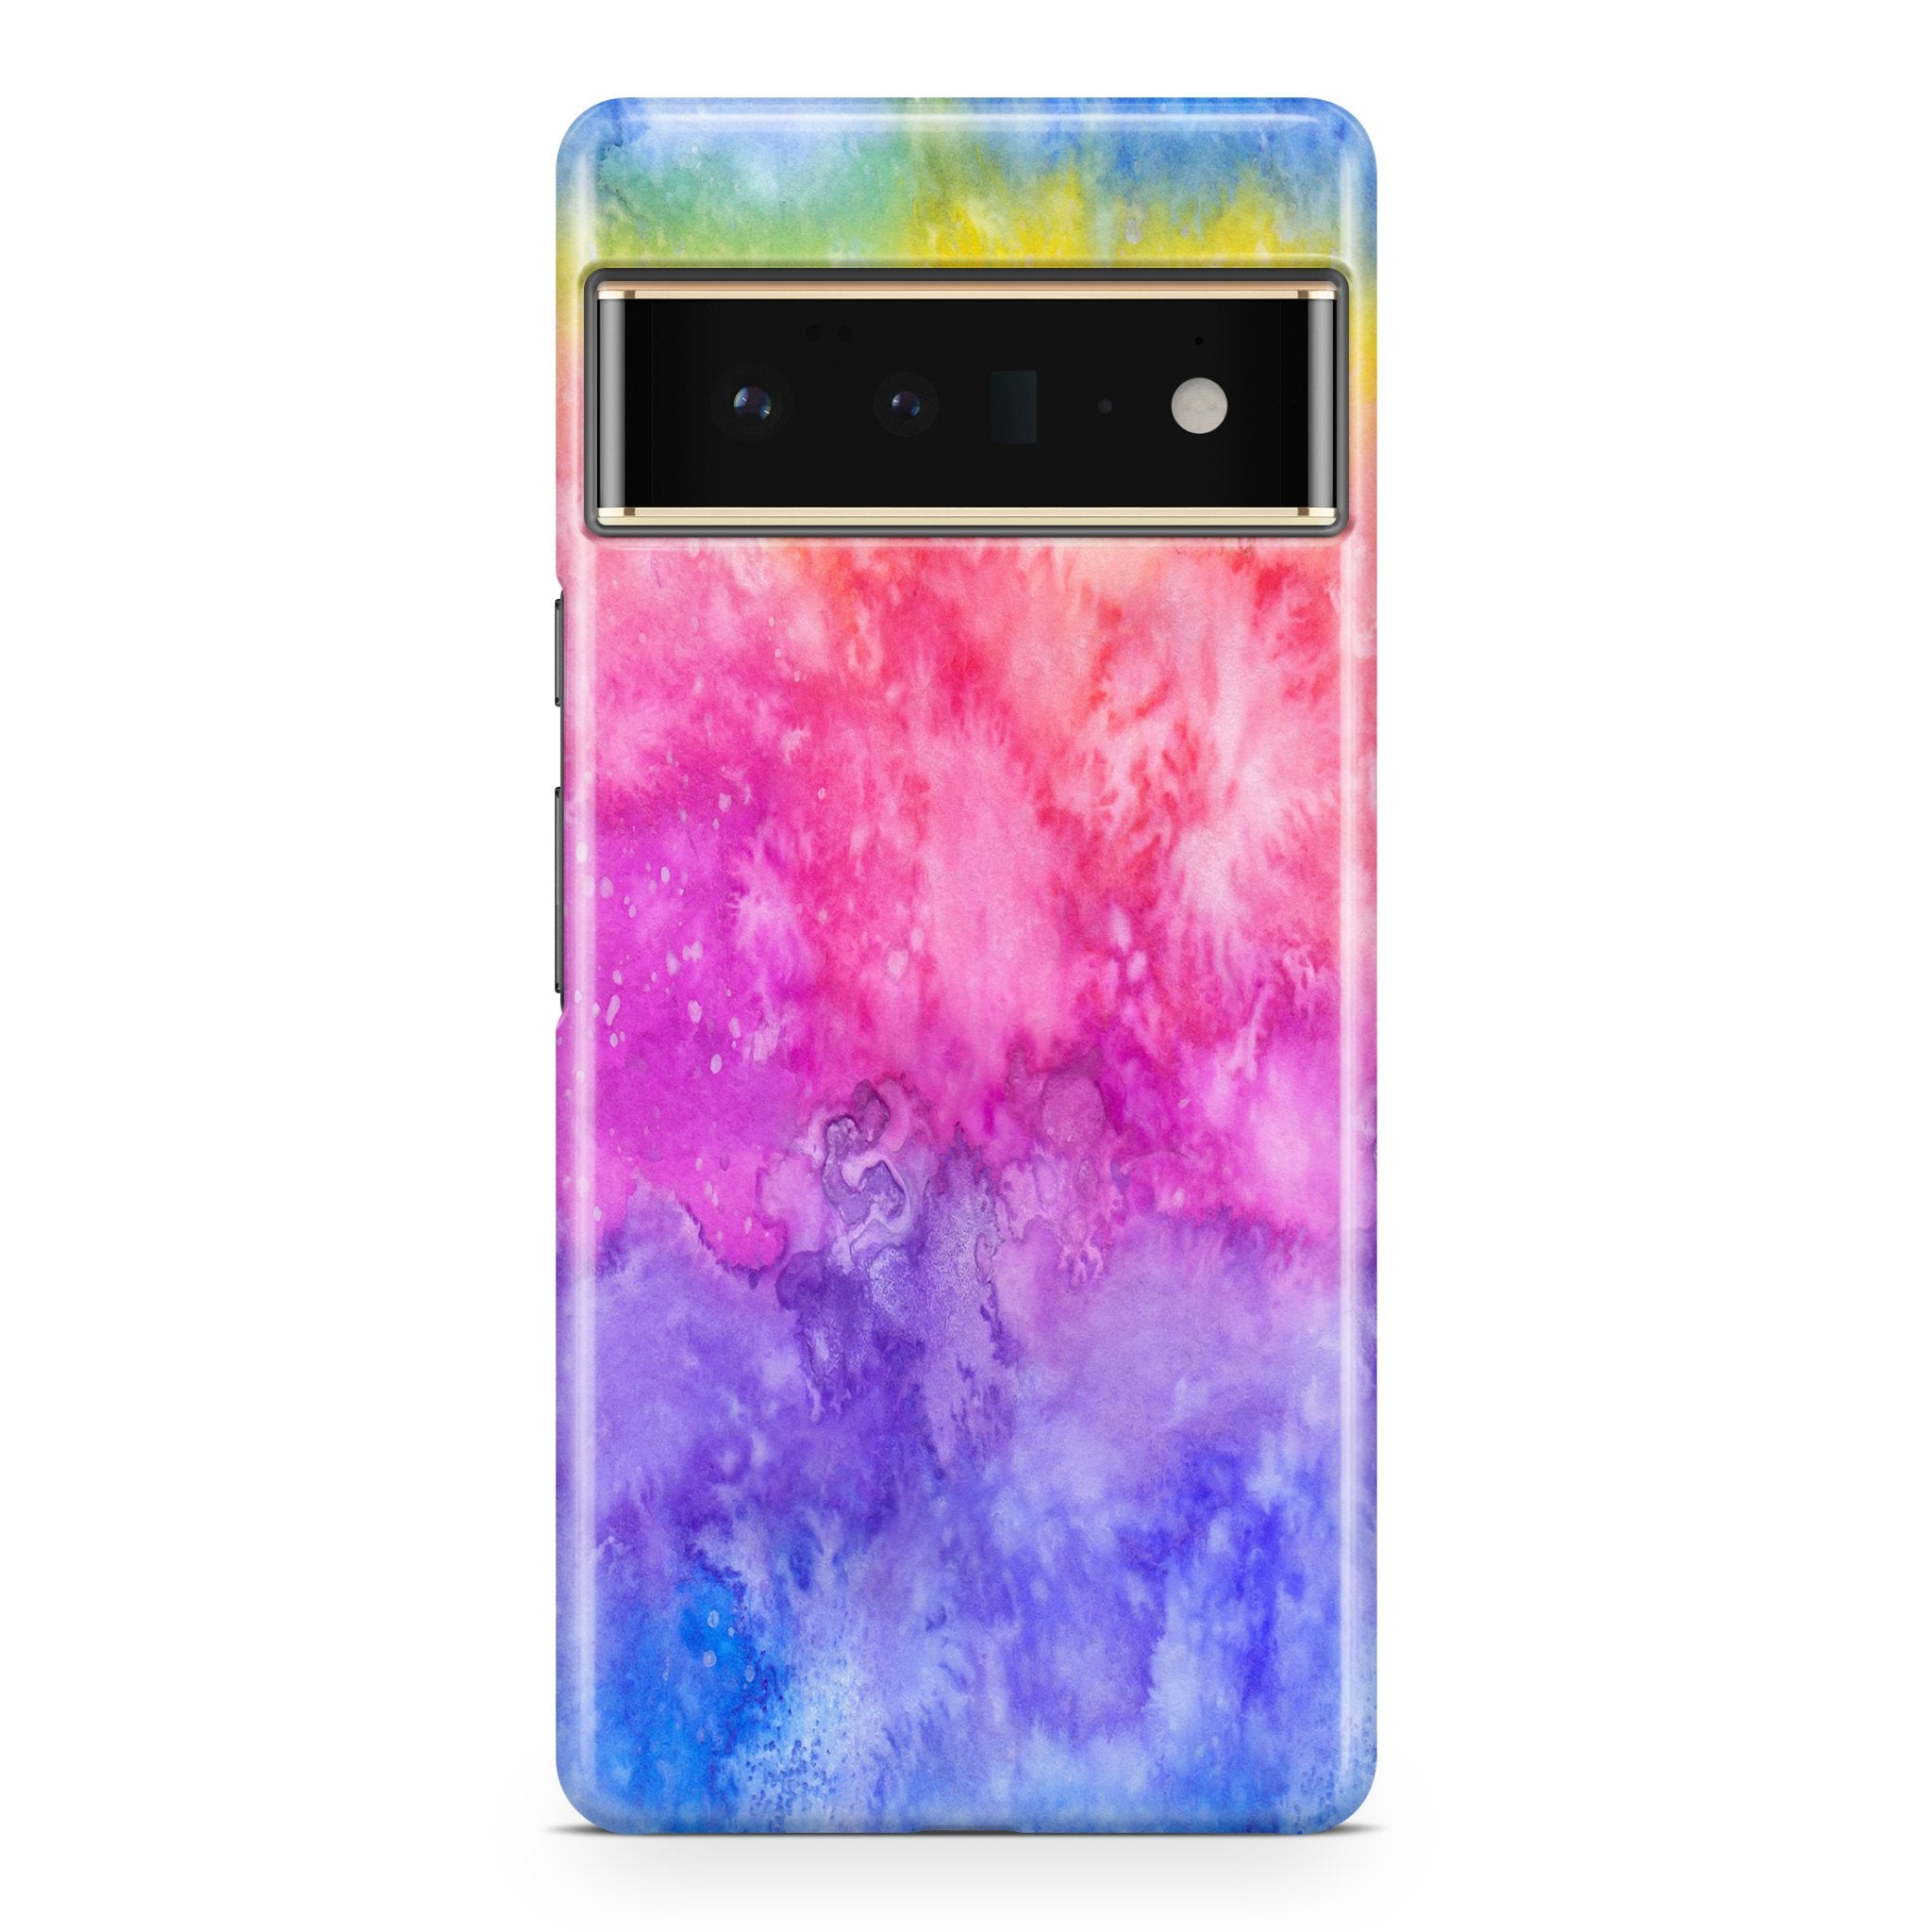 Watercolor Splash - Google phone case designs by CaseSwagger